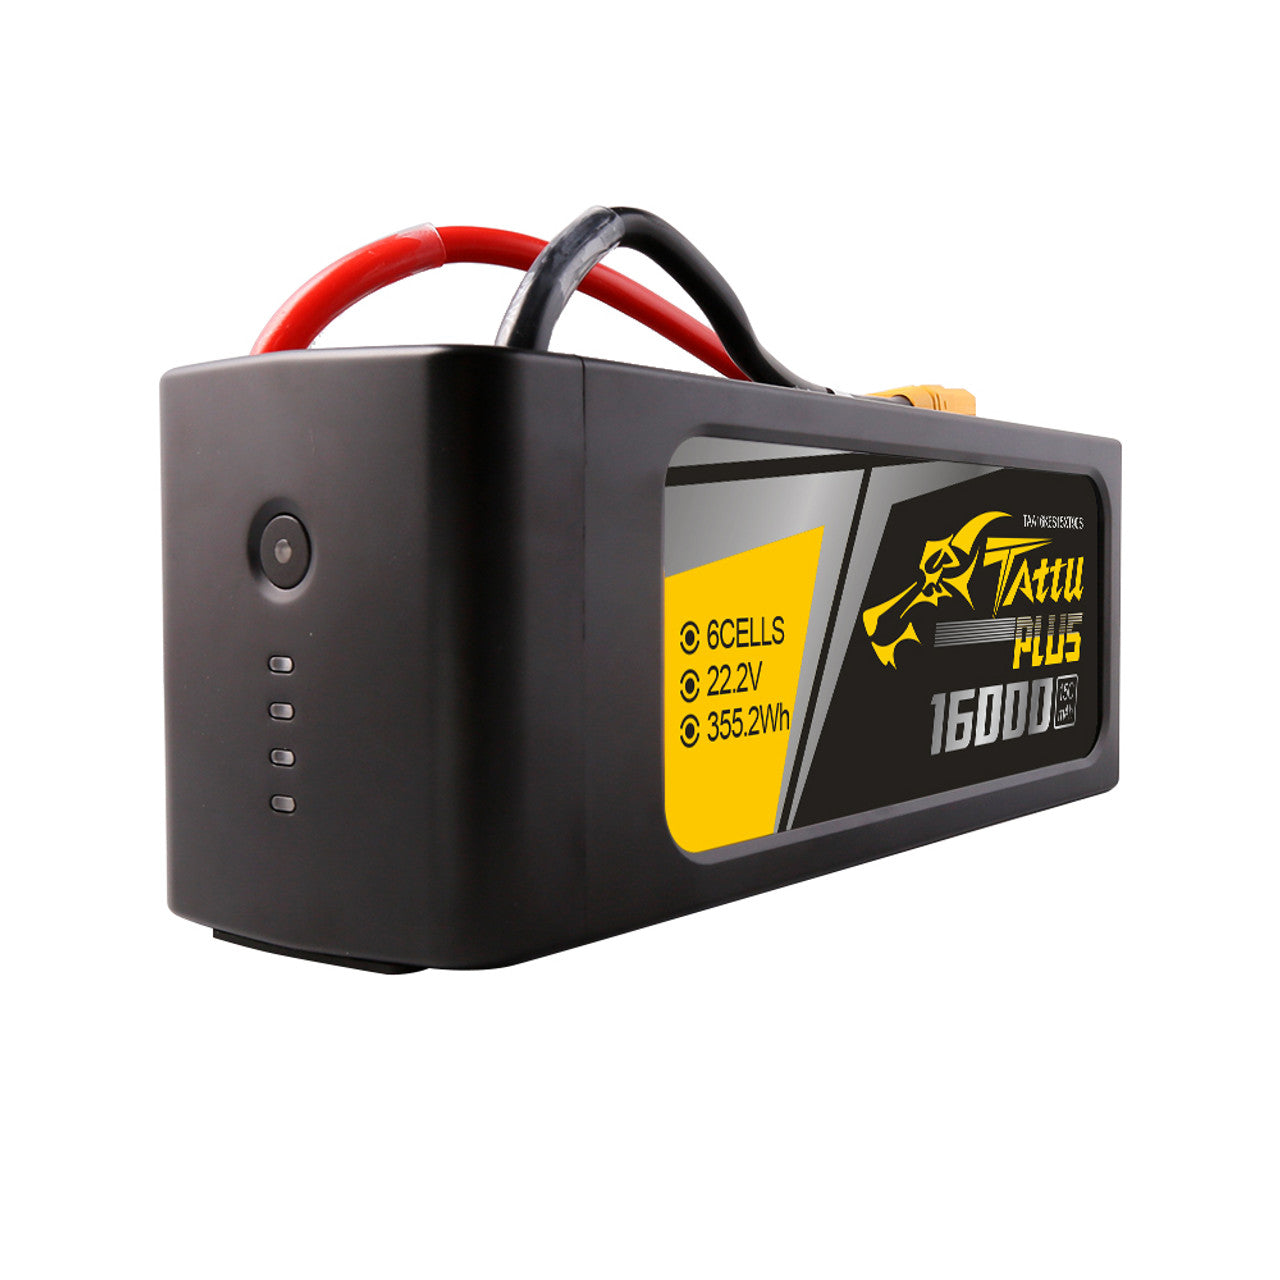 Tattu Plus 16000mAh 6S 15C 22.2V Lipo Battery, High-performance lithium-ion battery with 16Ah capacity, XT90 connector, and fast discharge rate for heavy-duty use.